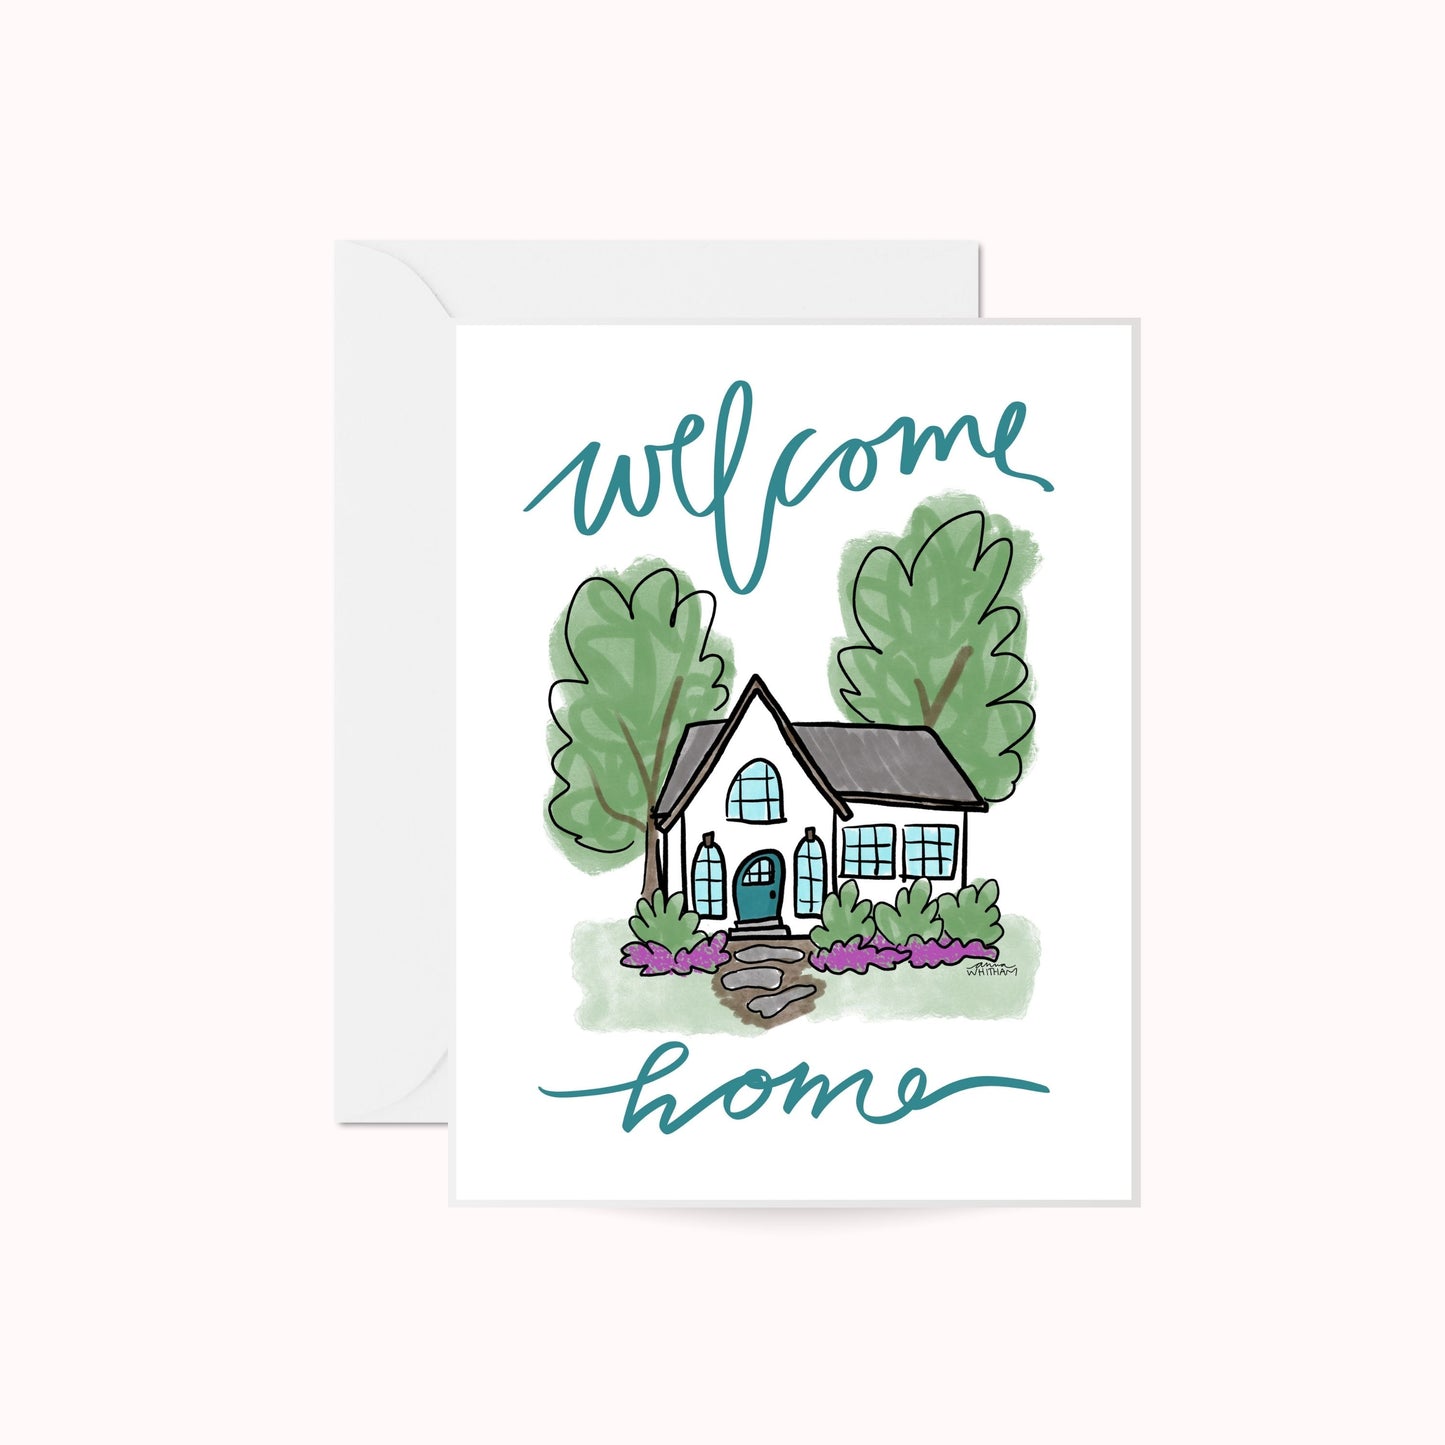 Welcome Home Greeting Card